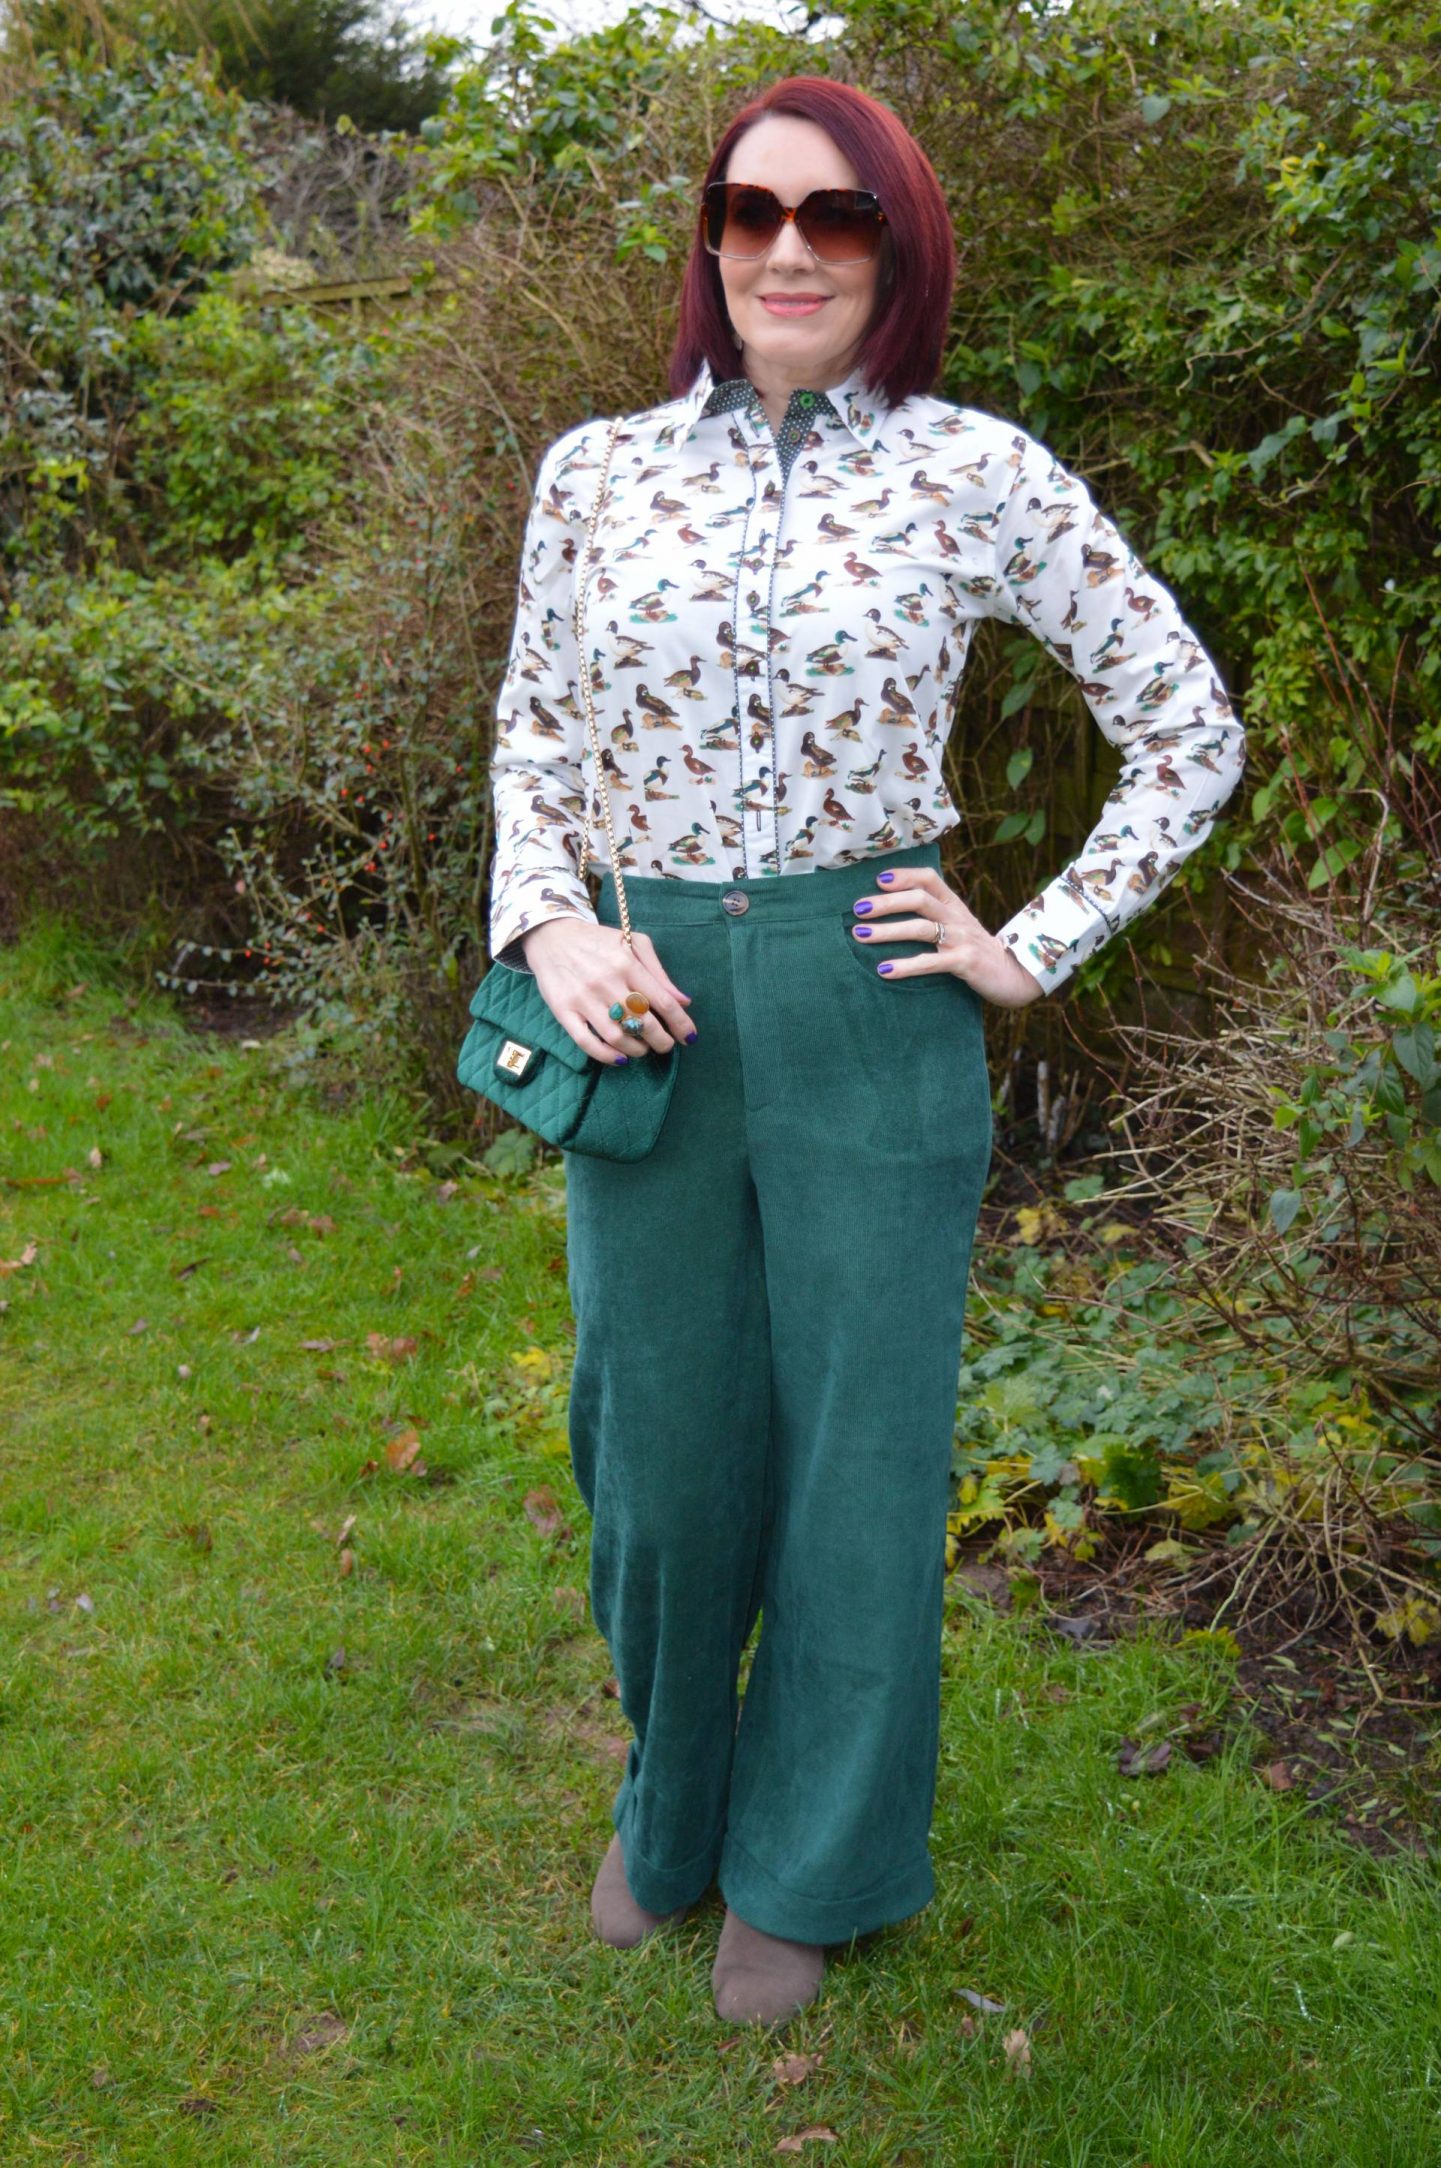 Salamander Shirts Duck Print Cotton Shirt, Coast baby cord forest green trousers, SVNX brown square sunglasses